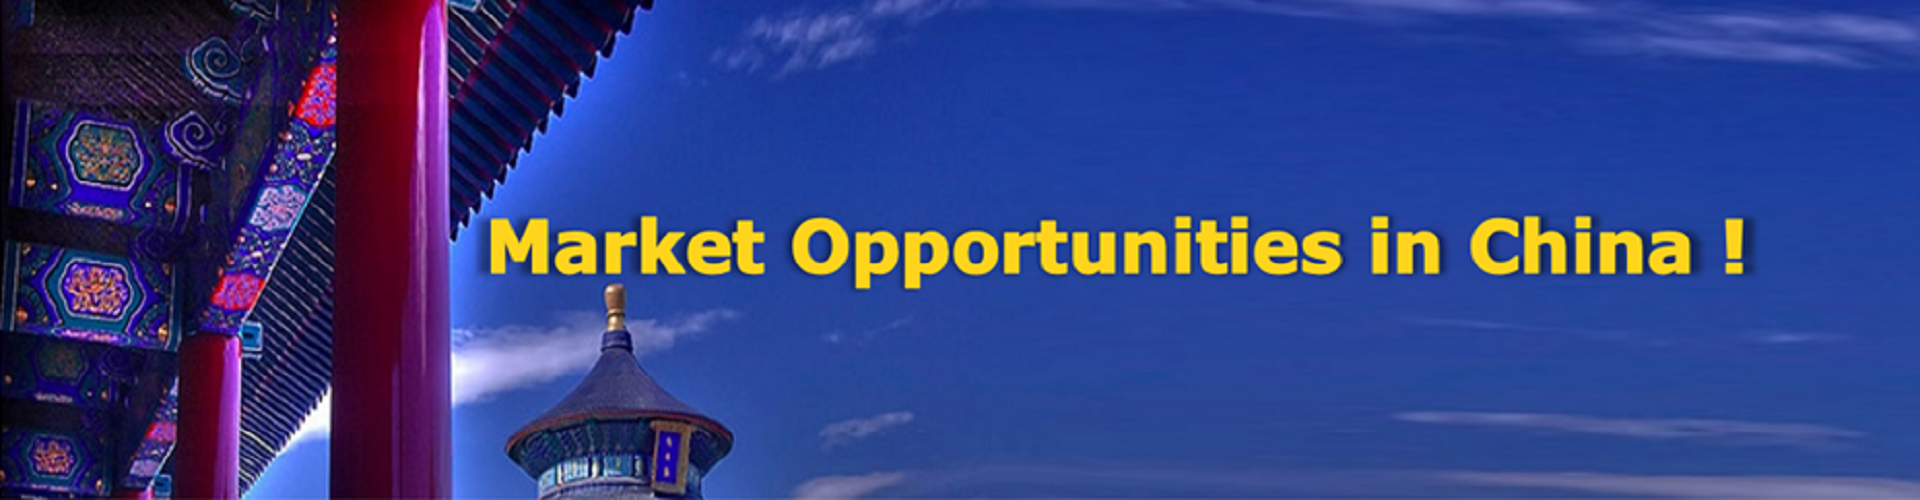 market-opportunities-in-China